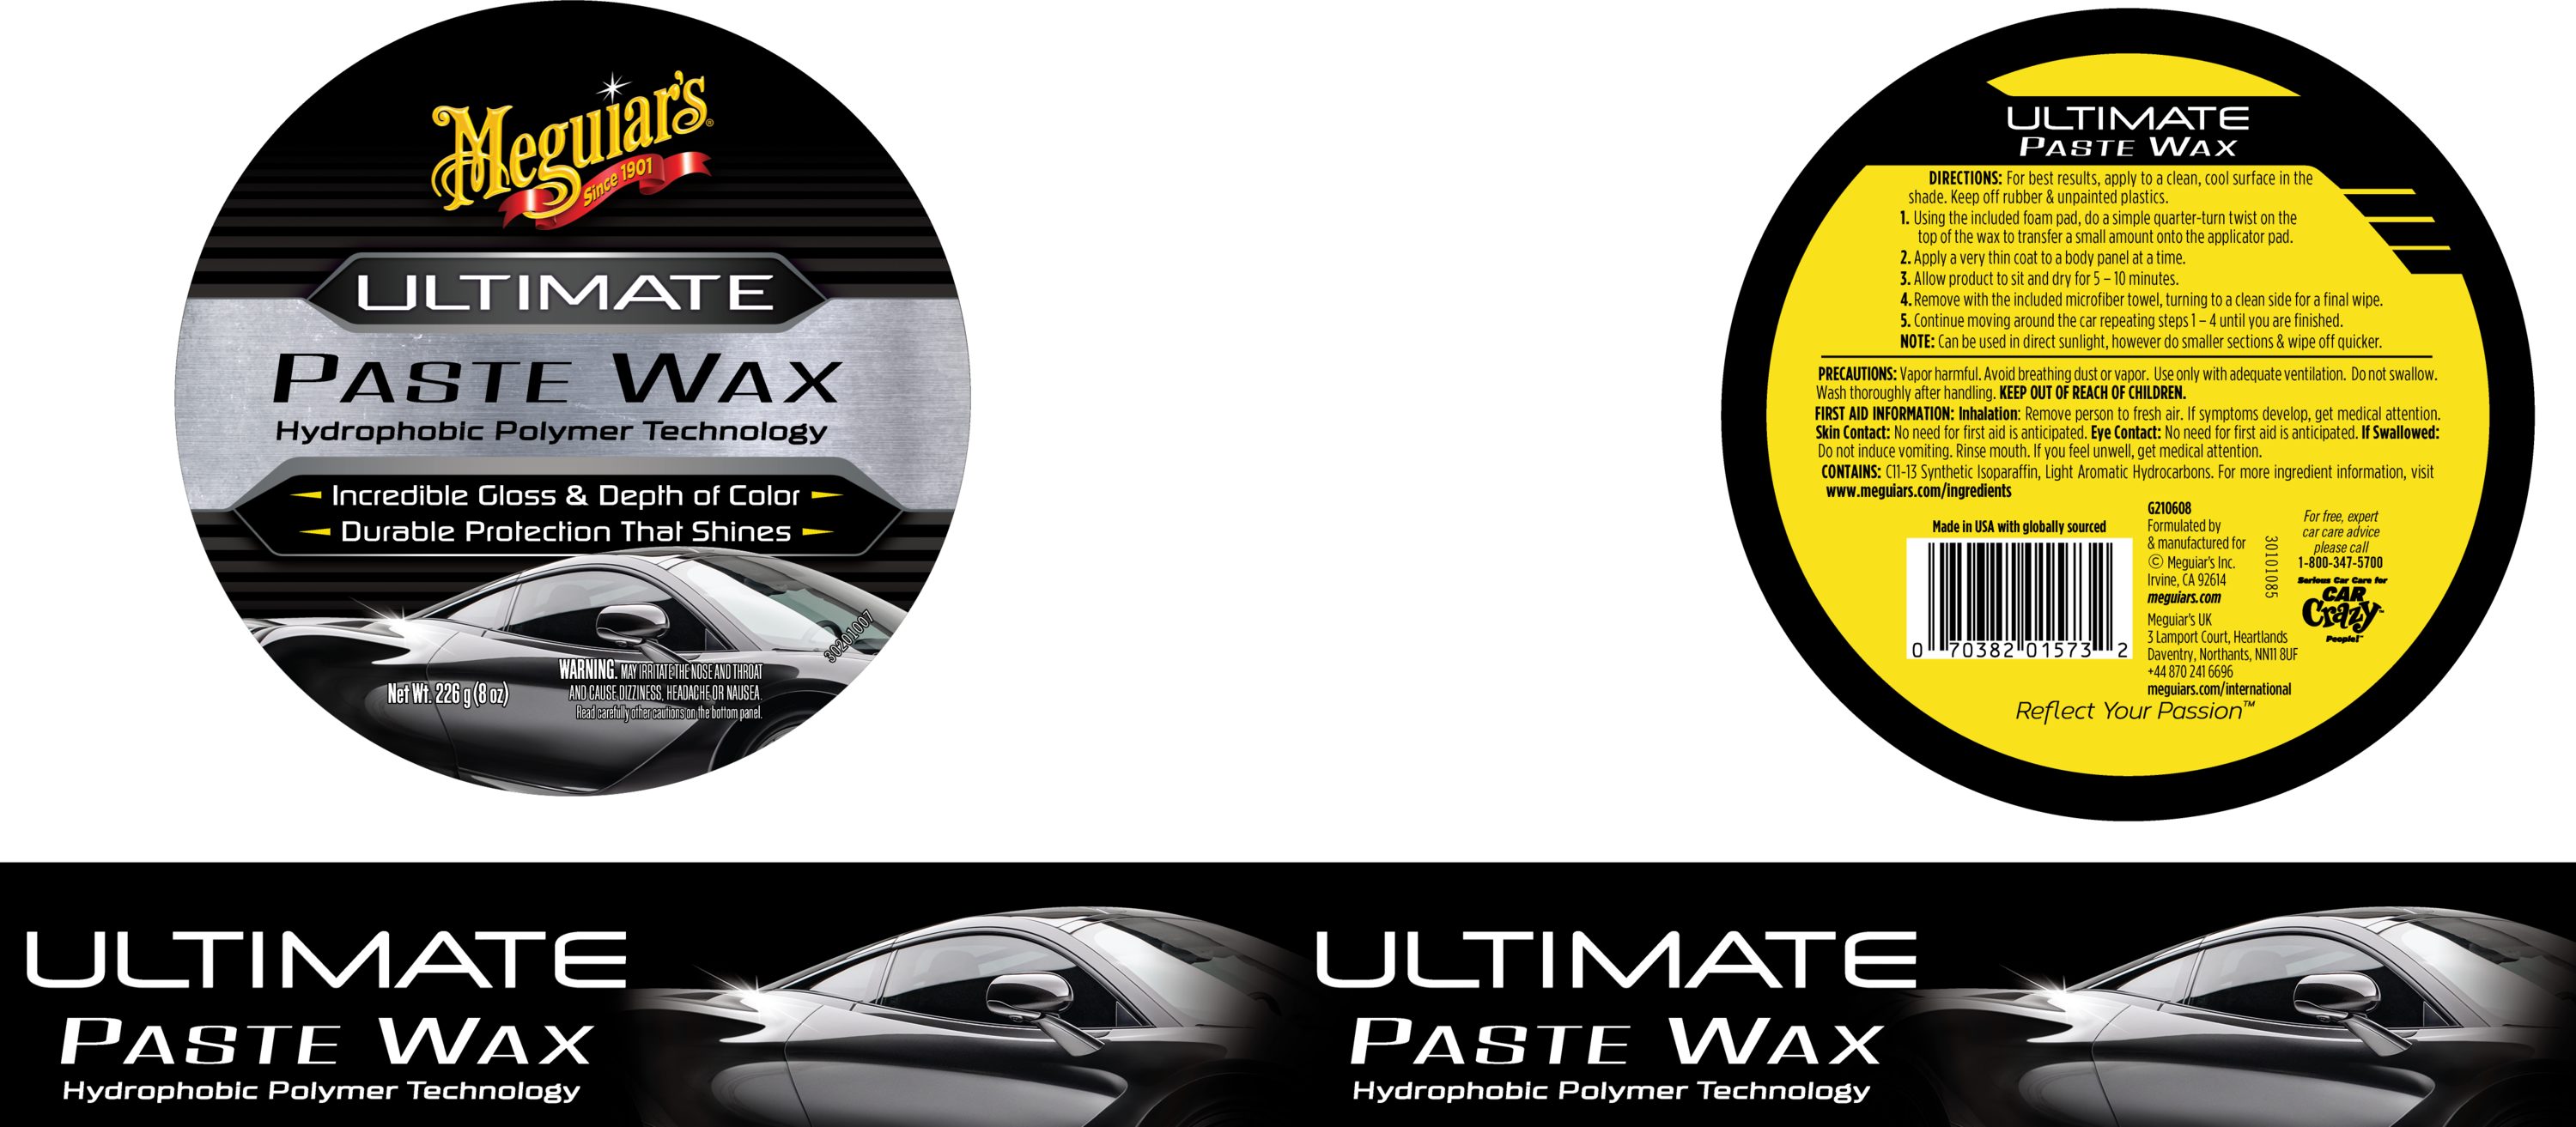 Meguiar's Ultimate Paste Wax, Long-Lasting, Easy to Use Synthetic